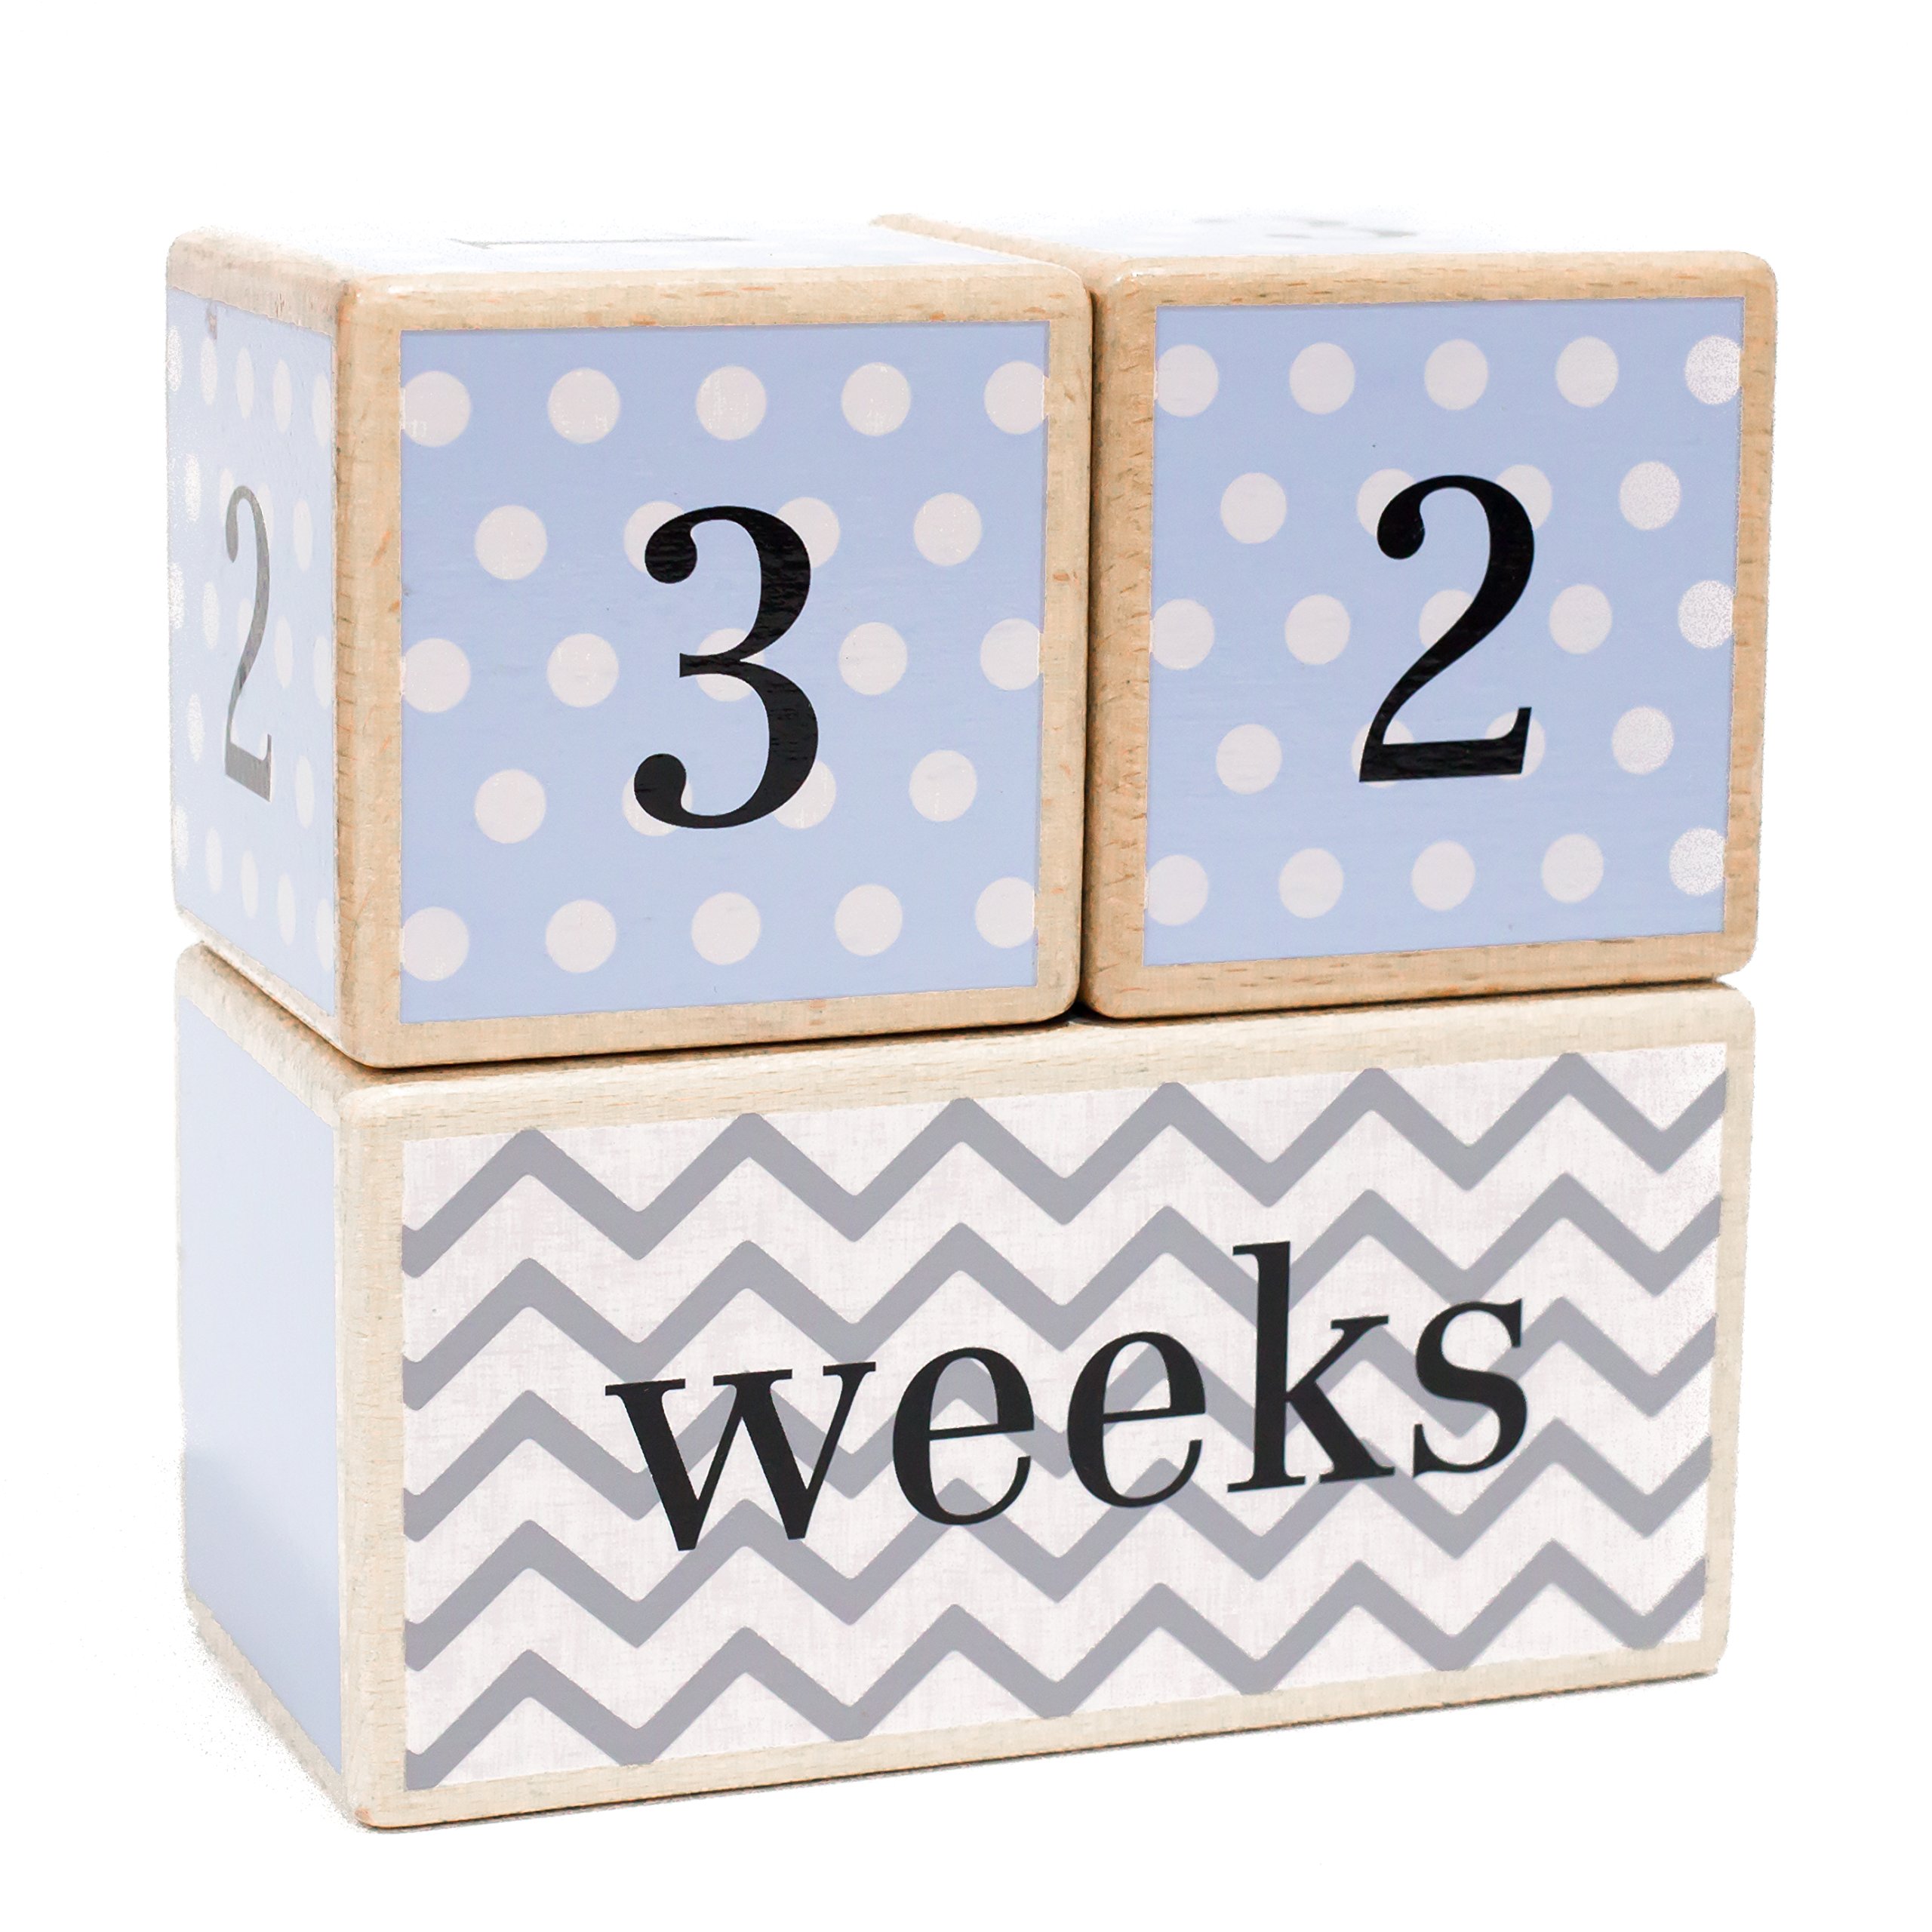 Solid Wood Milestone Age Blocks in Blue. Baby Age Photo Blocks and Photo Props…